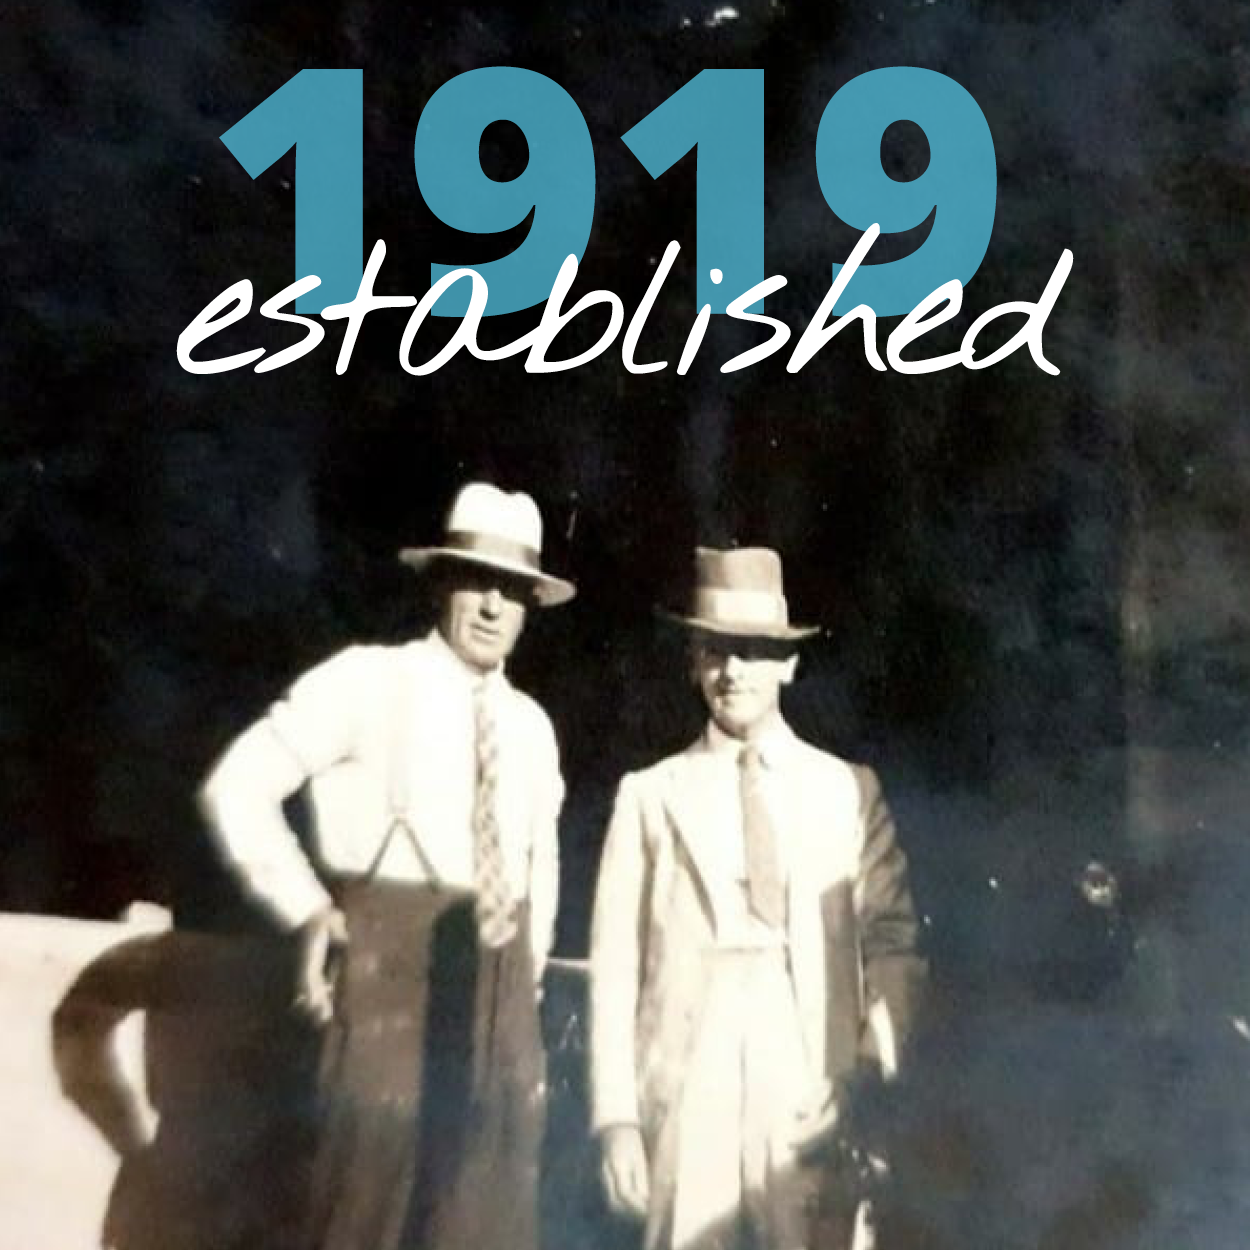 Photo of two men wearing white suits and hats